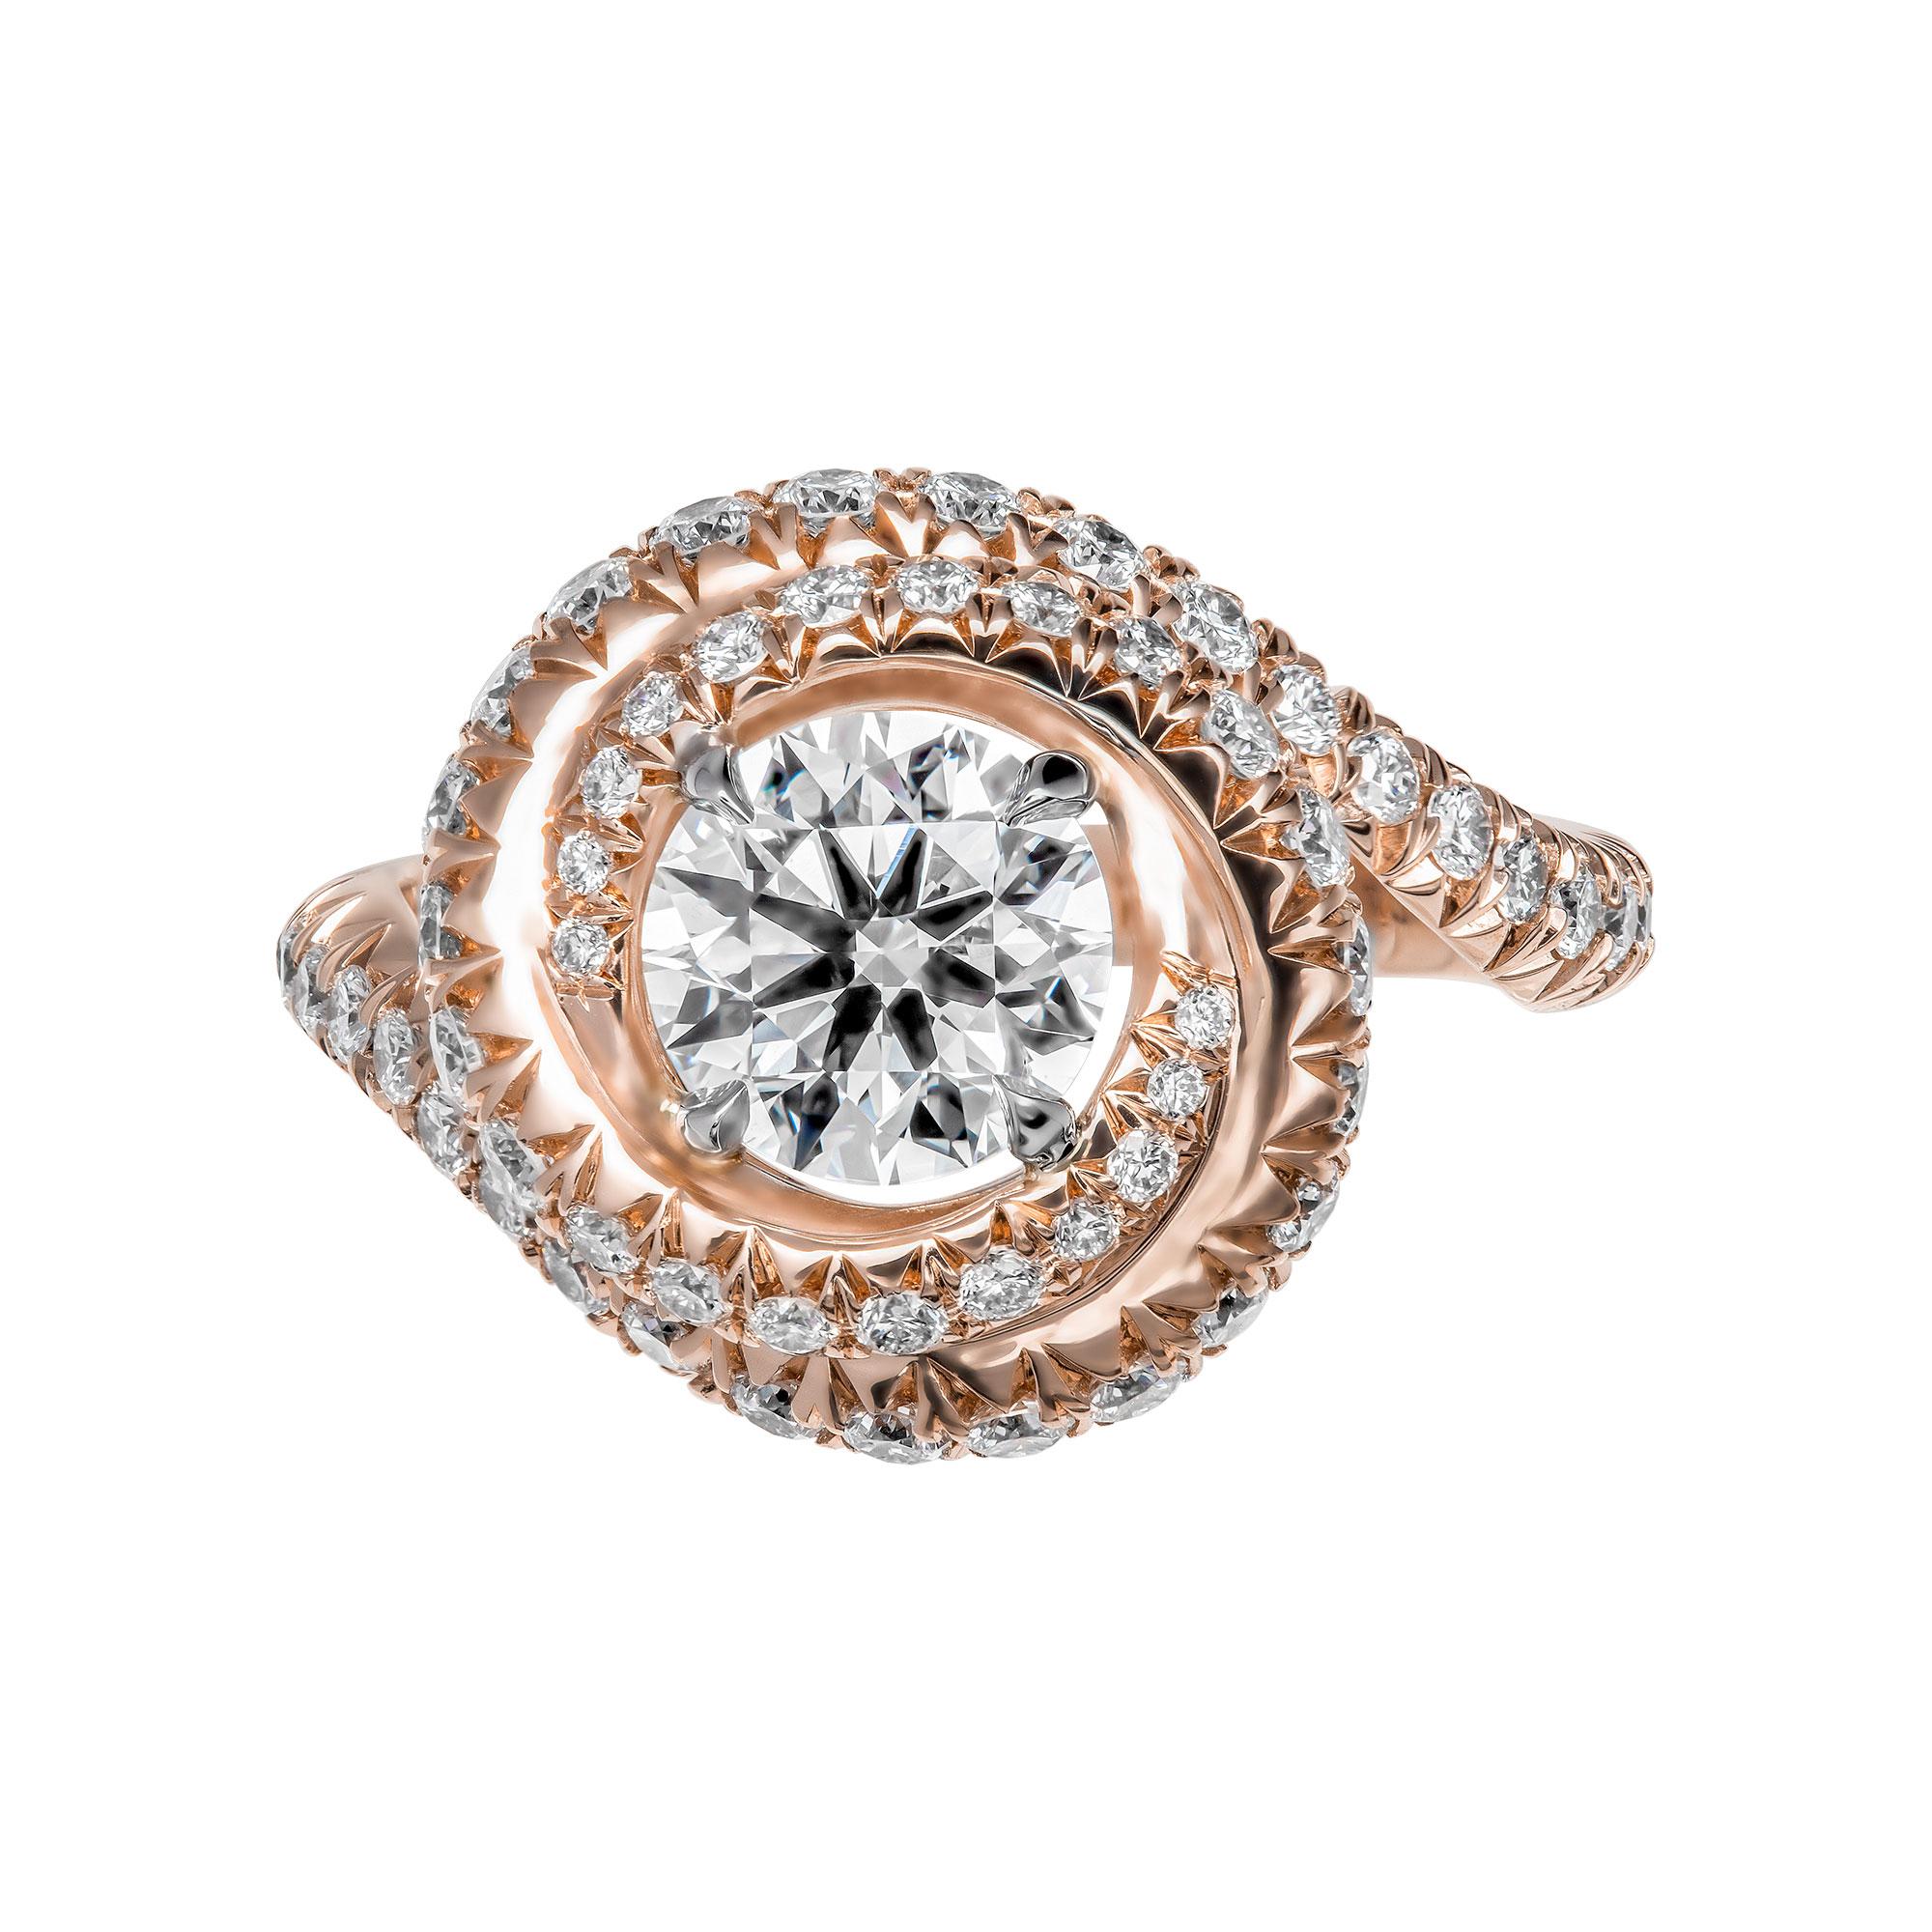 Dazzling and elegant , Mounted in 14K Rose Gold , this ring features exceptional french pave work. Encrusted all over, creating a beautiful swirl that hugs Round Diamond center stone
Ring Encrusted with almost 1 catar of full brilliant cut pave